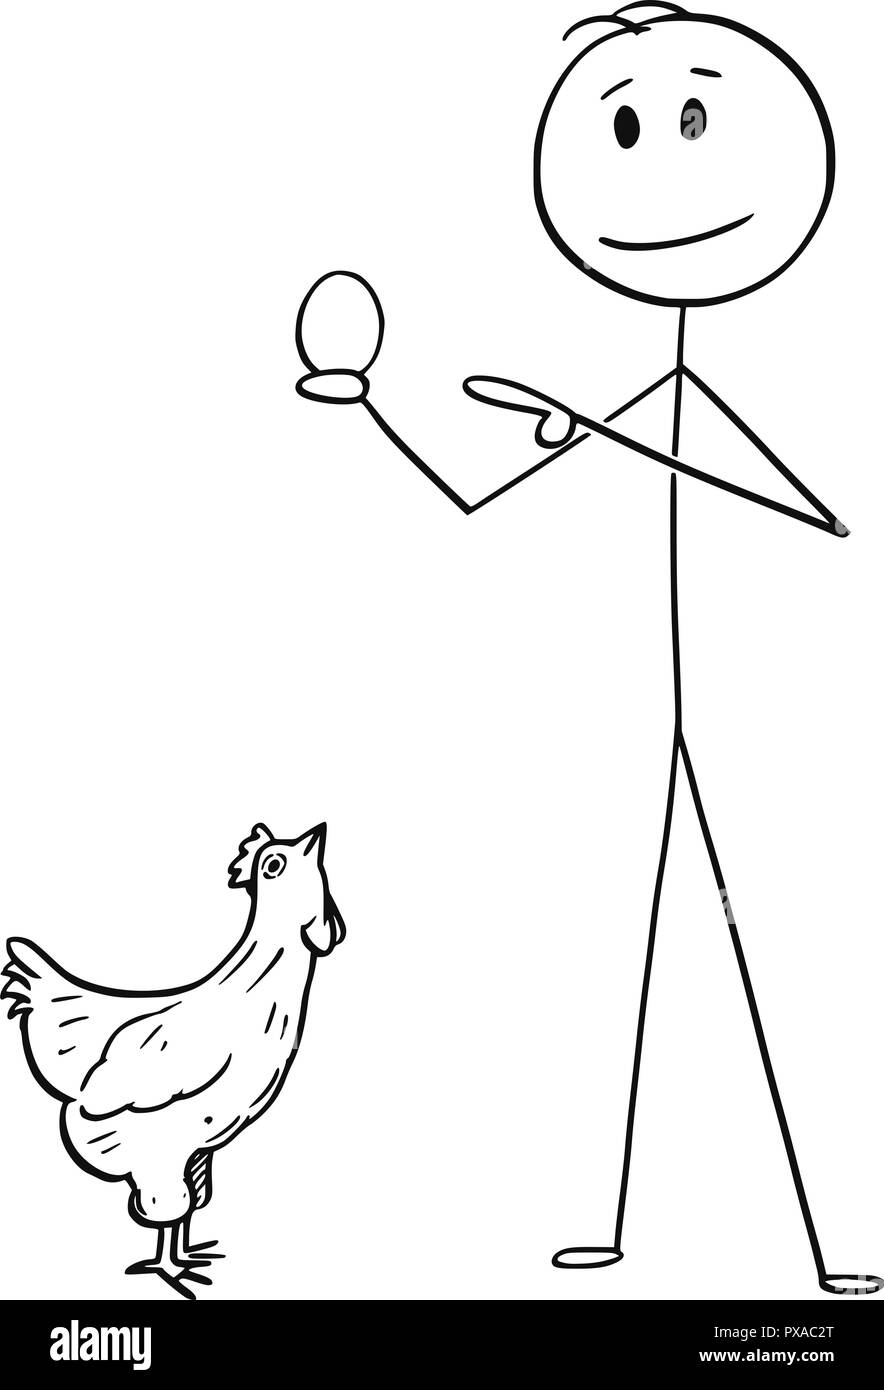 Cartoon of Man Holding Egg and Hen or Chicken is Watching Him Stock Vector